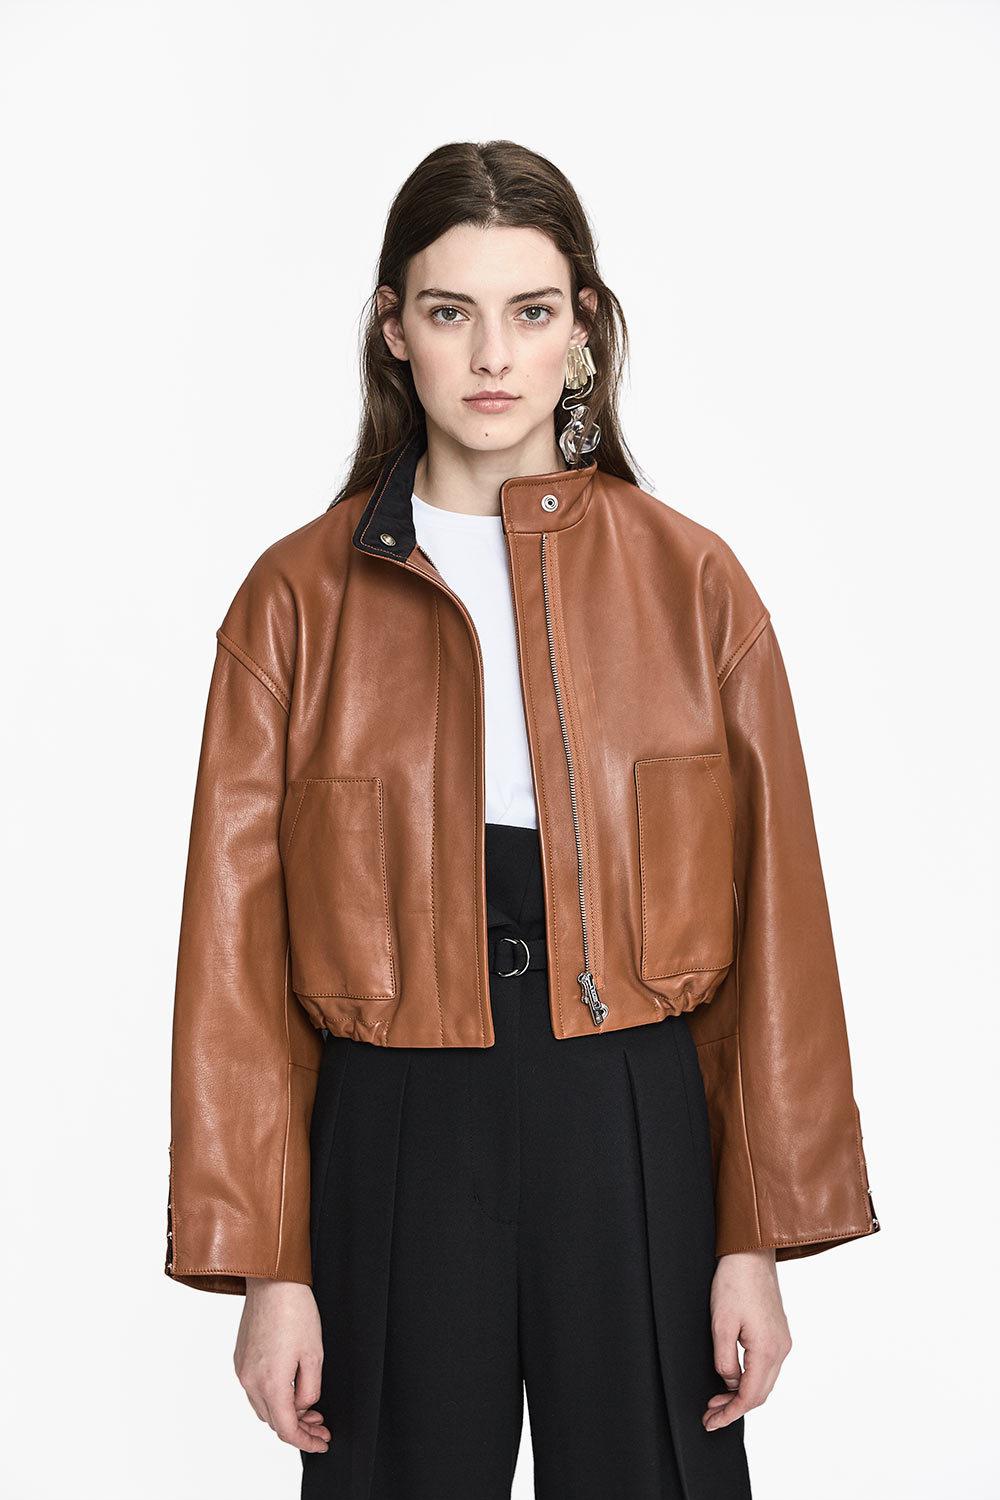 Lyst - 3.1 Phillip Lim Leather Bomber Jacket? in Brown